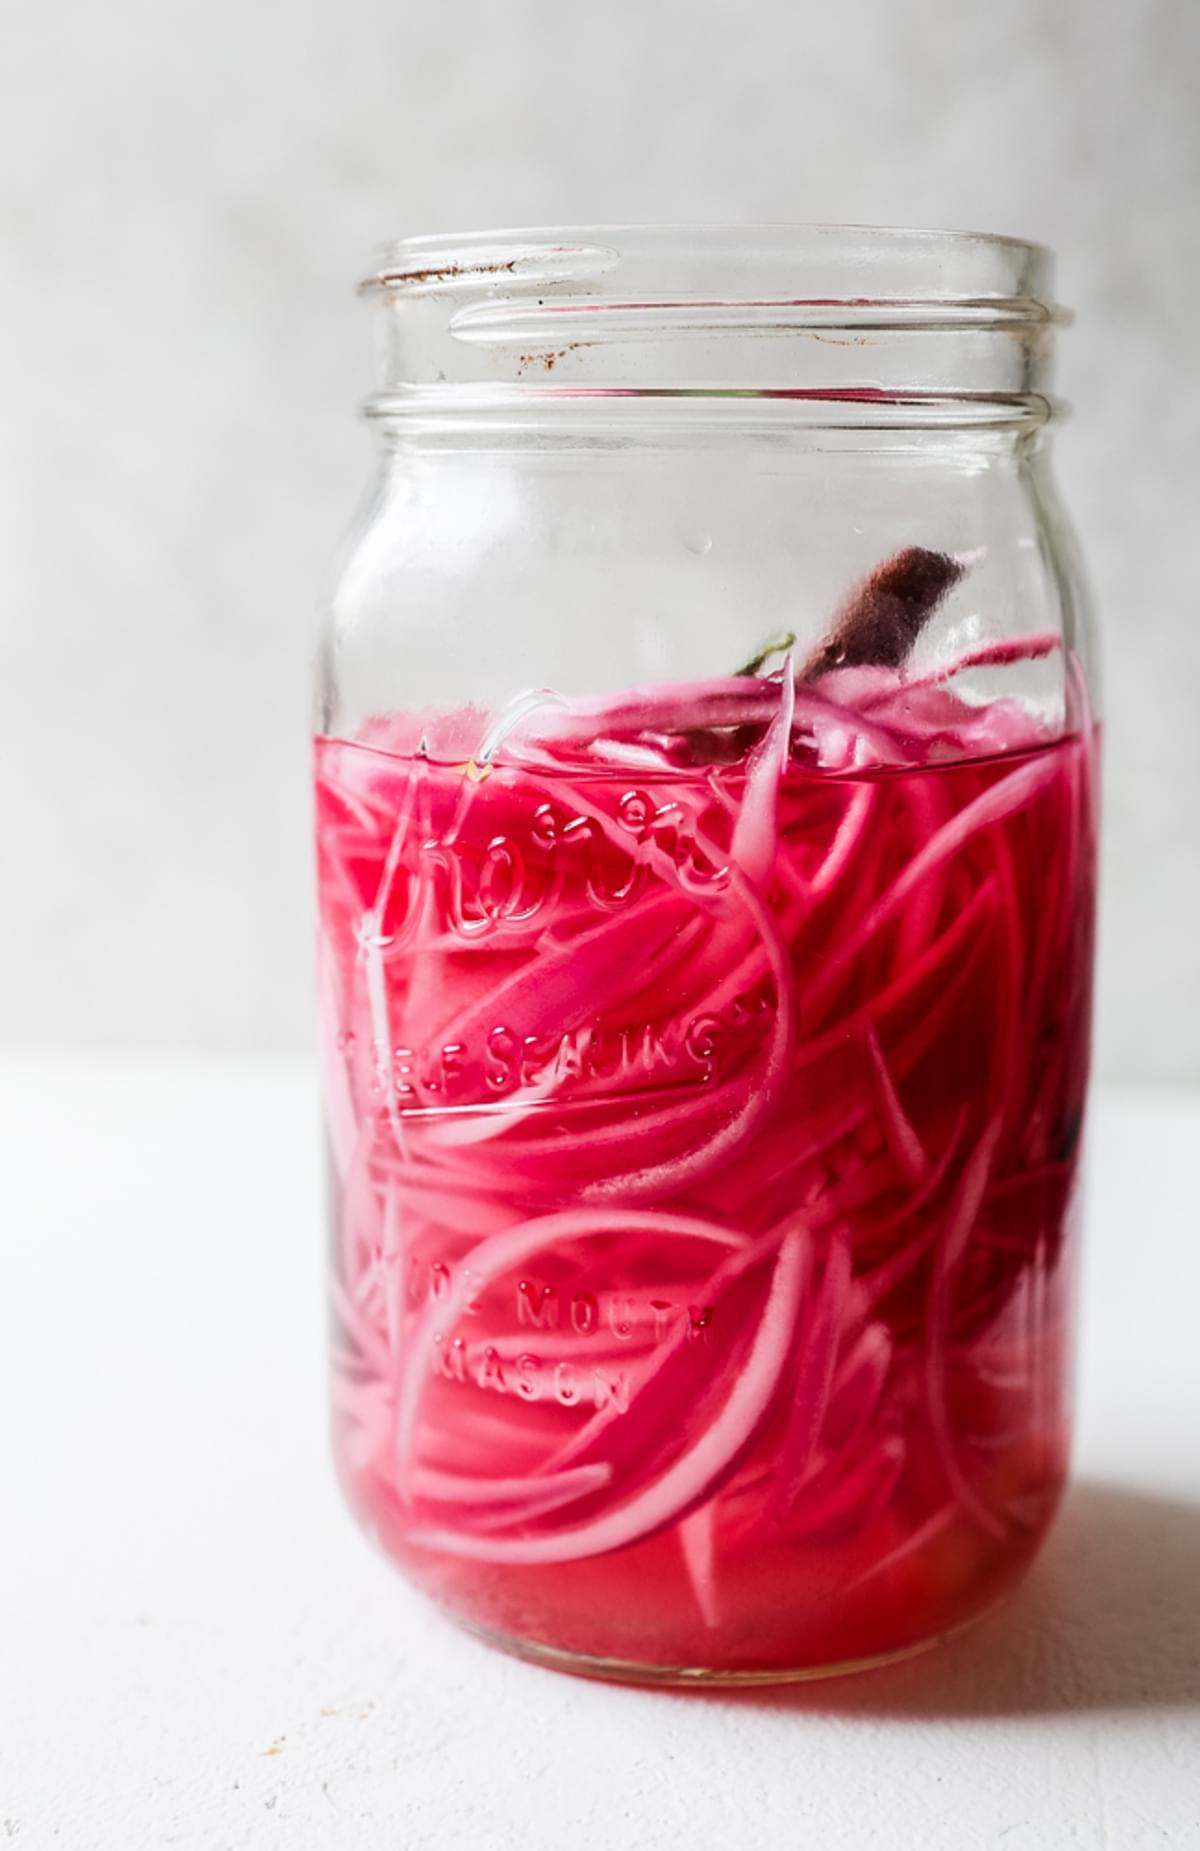 homemade pickled red onions in a jar